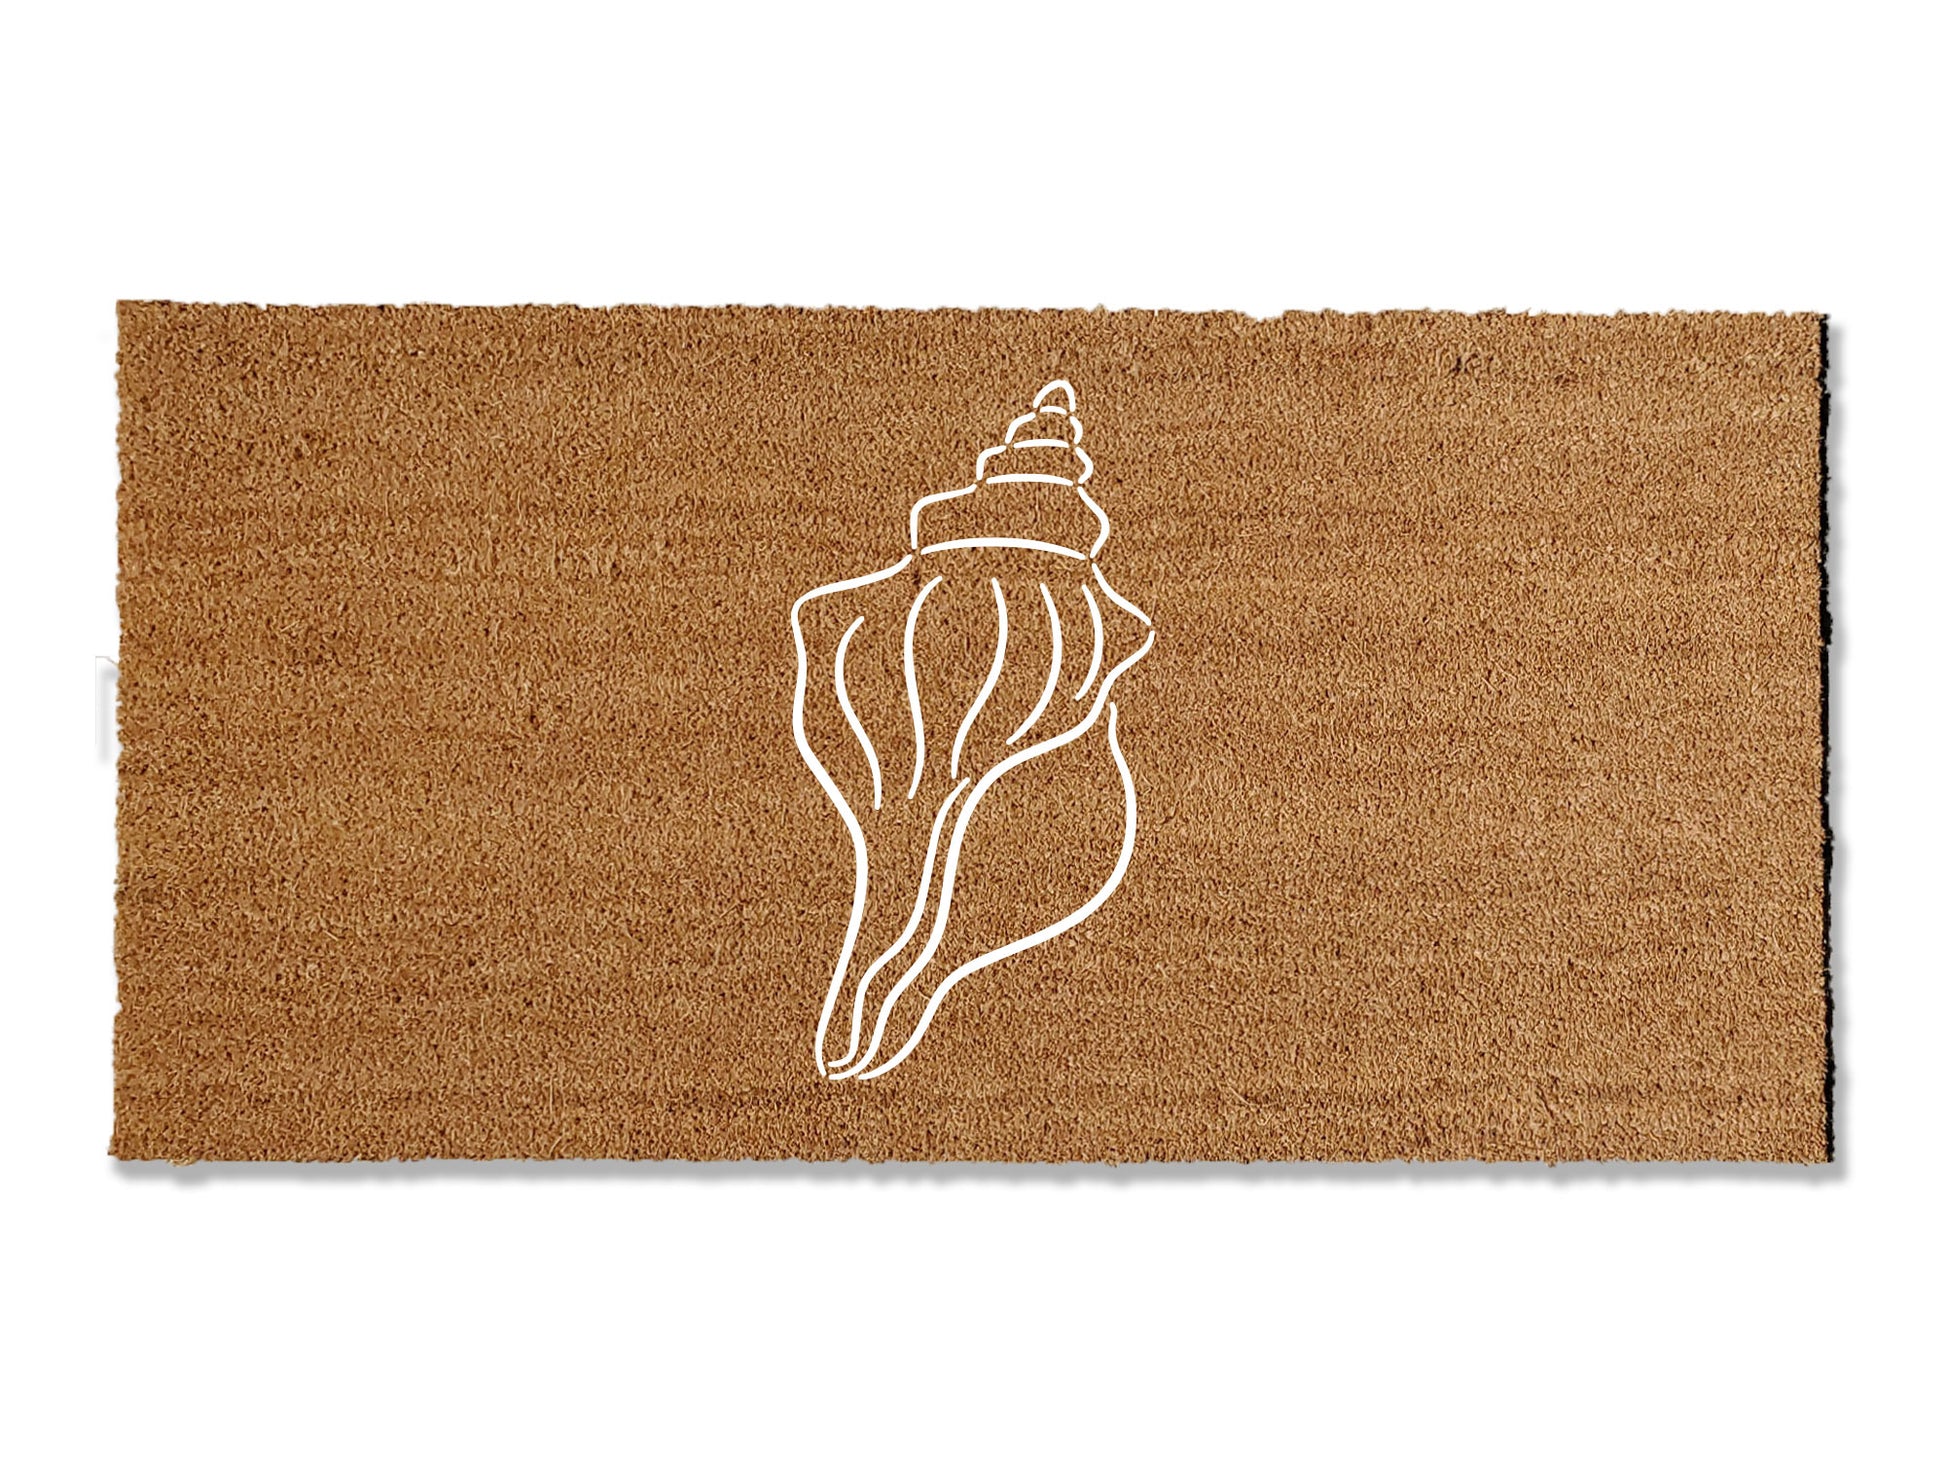 Transform your entryway with our versatile coir welcome doormat adorned with a beautiful Conch Shell design. Available in multiple sizes, this coastal-inspired mat is a perfect addition to your beach house, bringing a touch of seaside charm that spruces up your home's entrance.